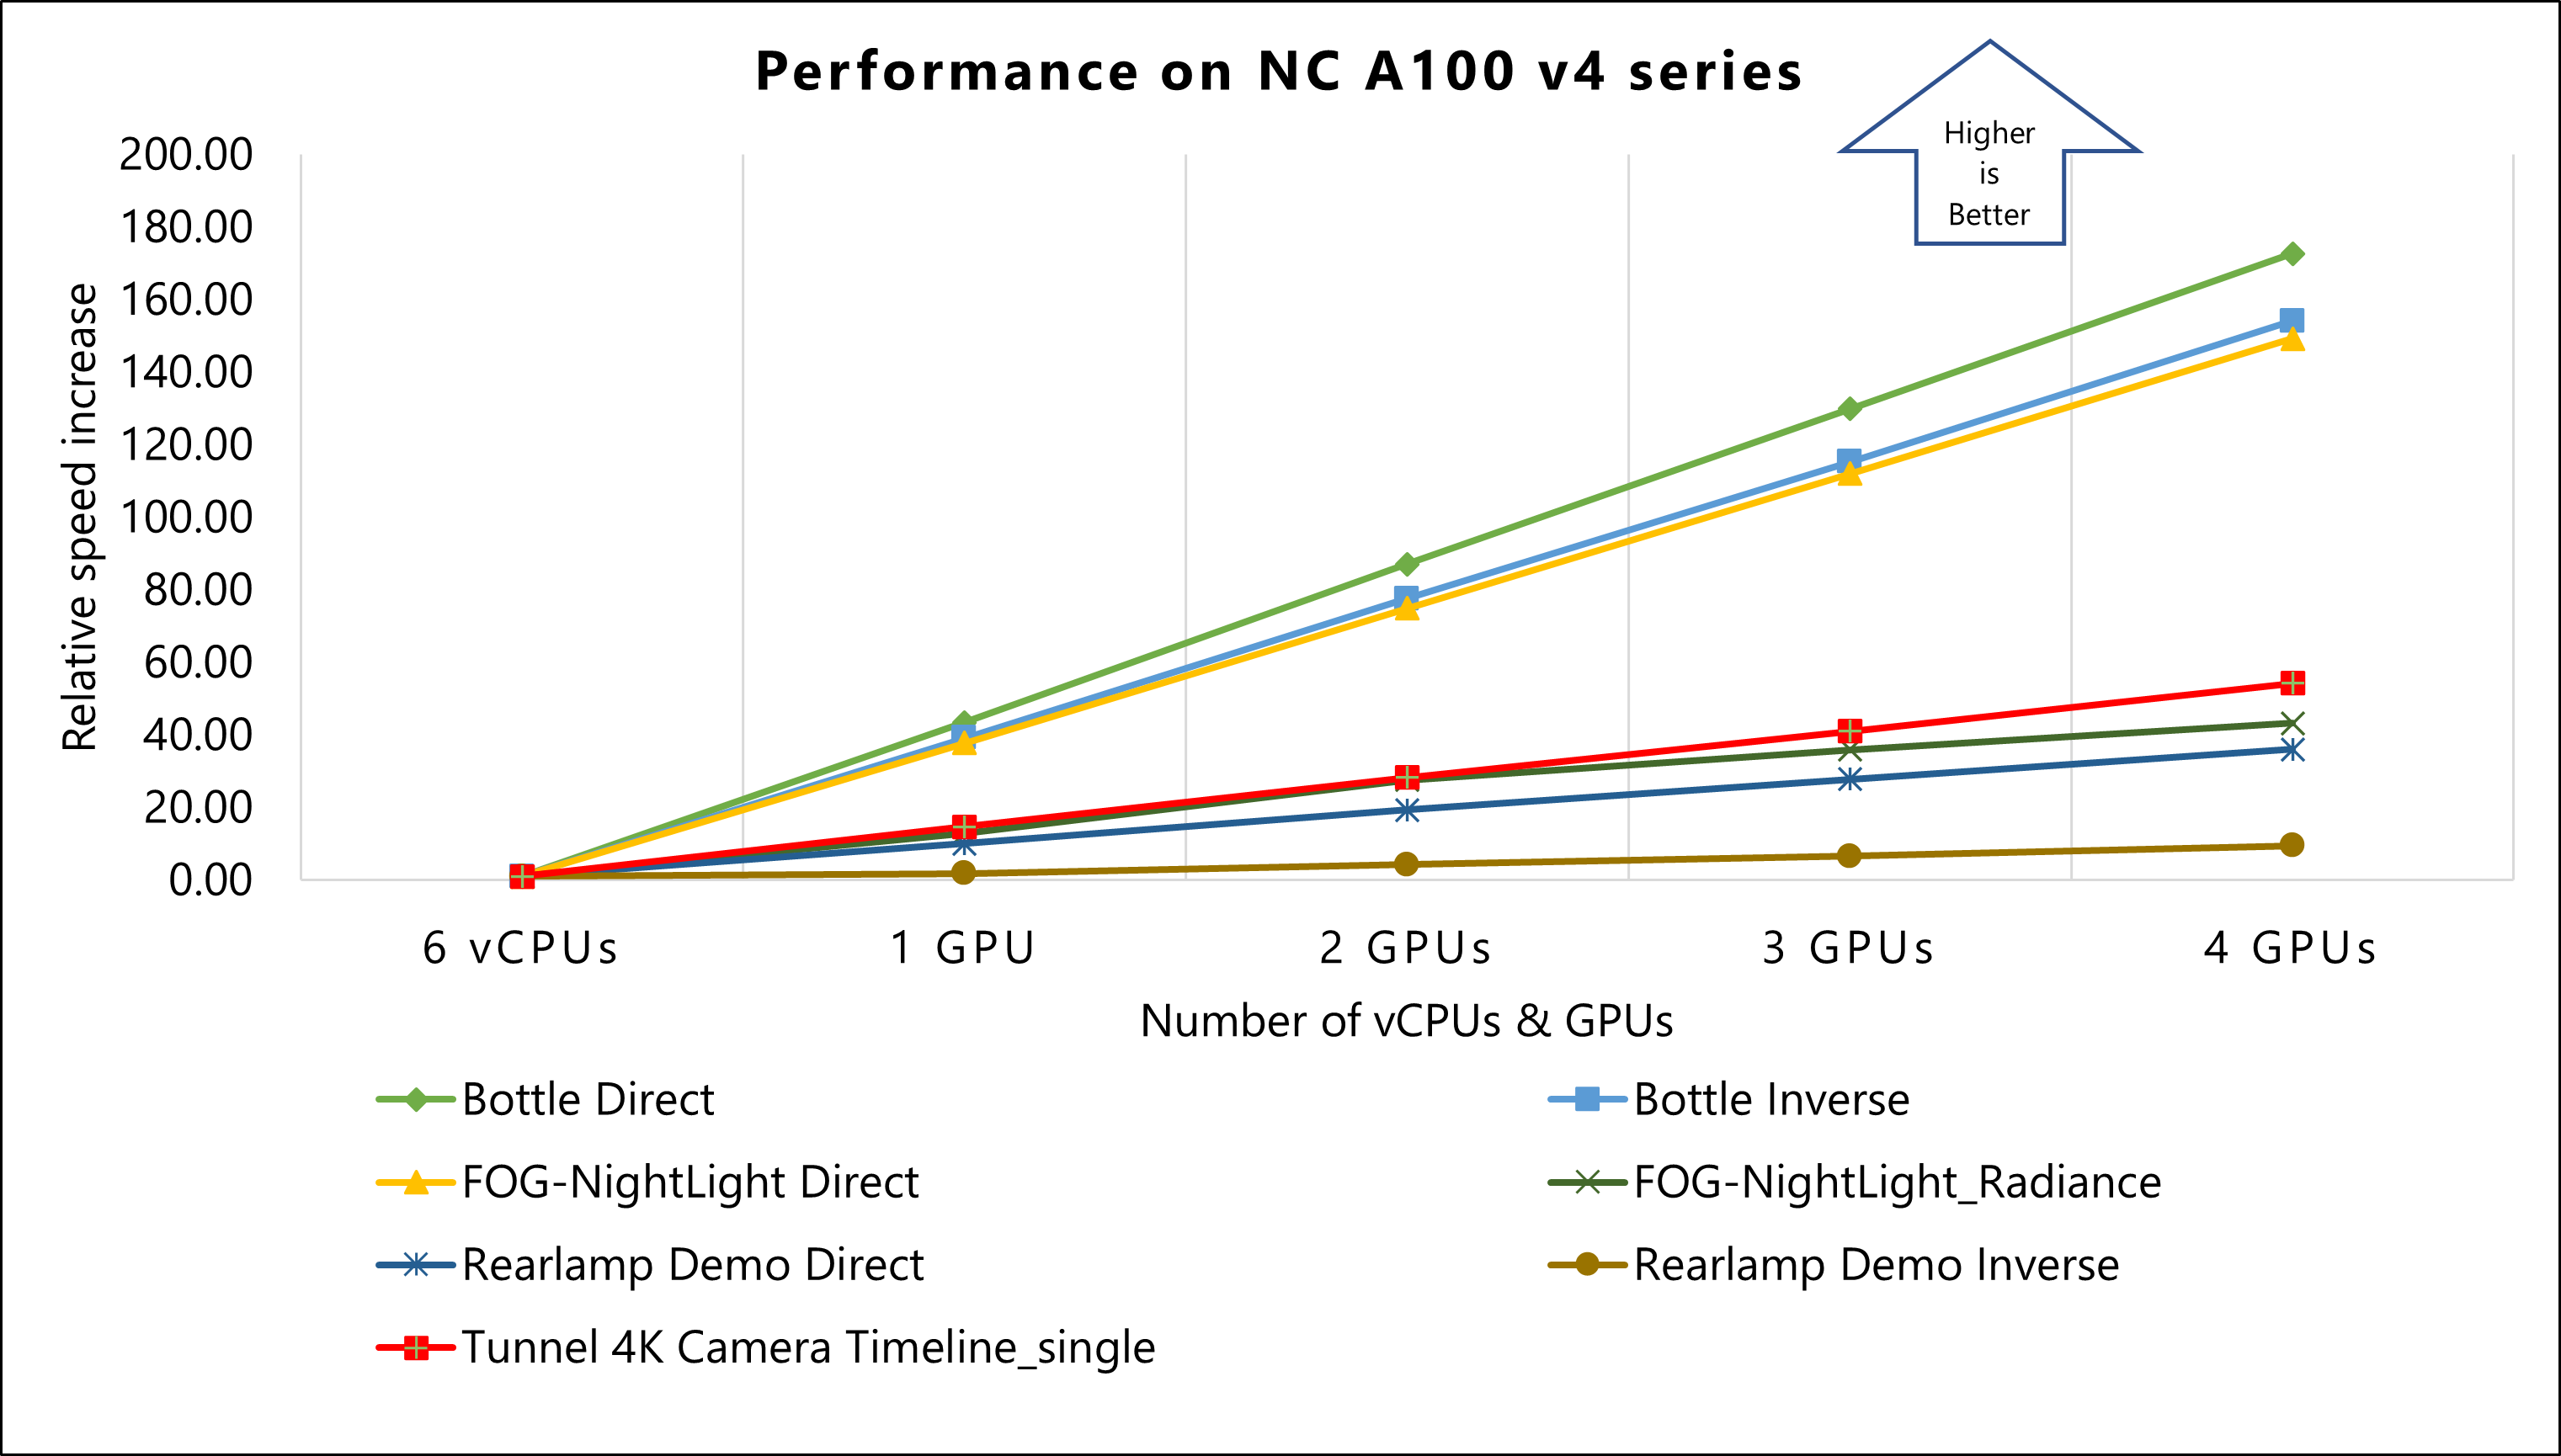 Graph showing relative speed increase of models on NC A100 v4-series VM.